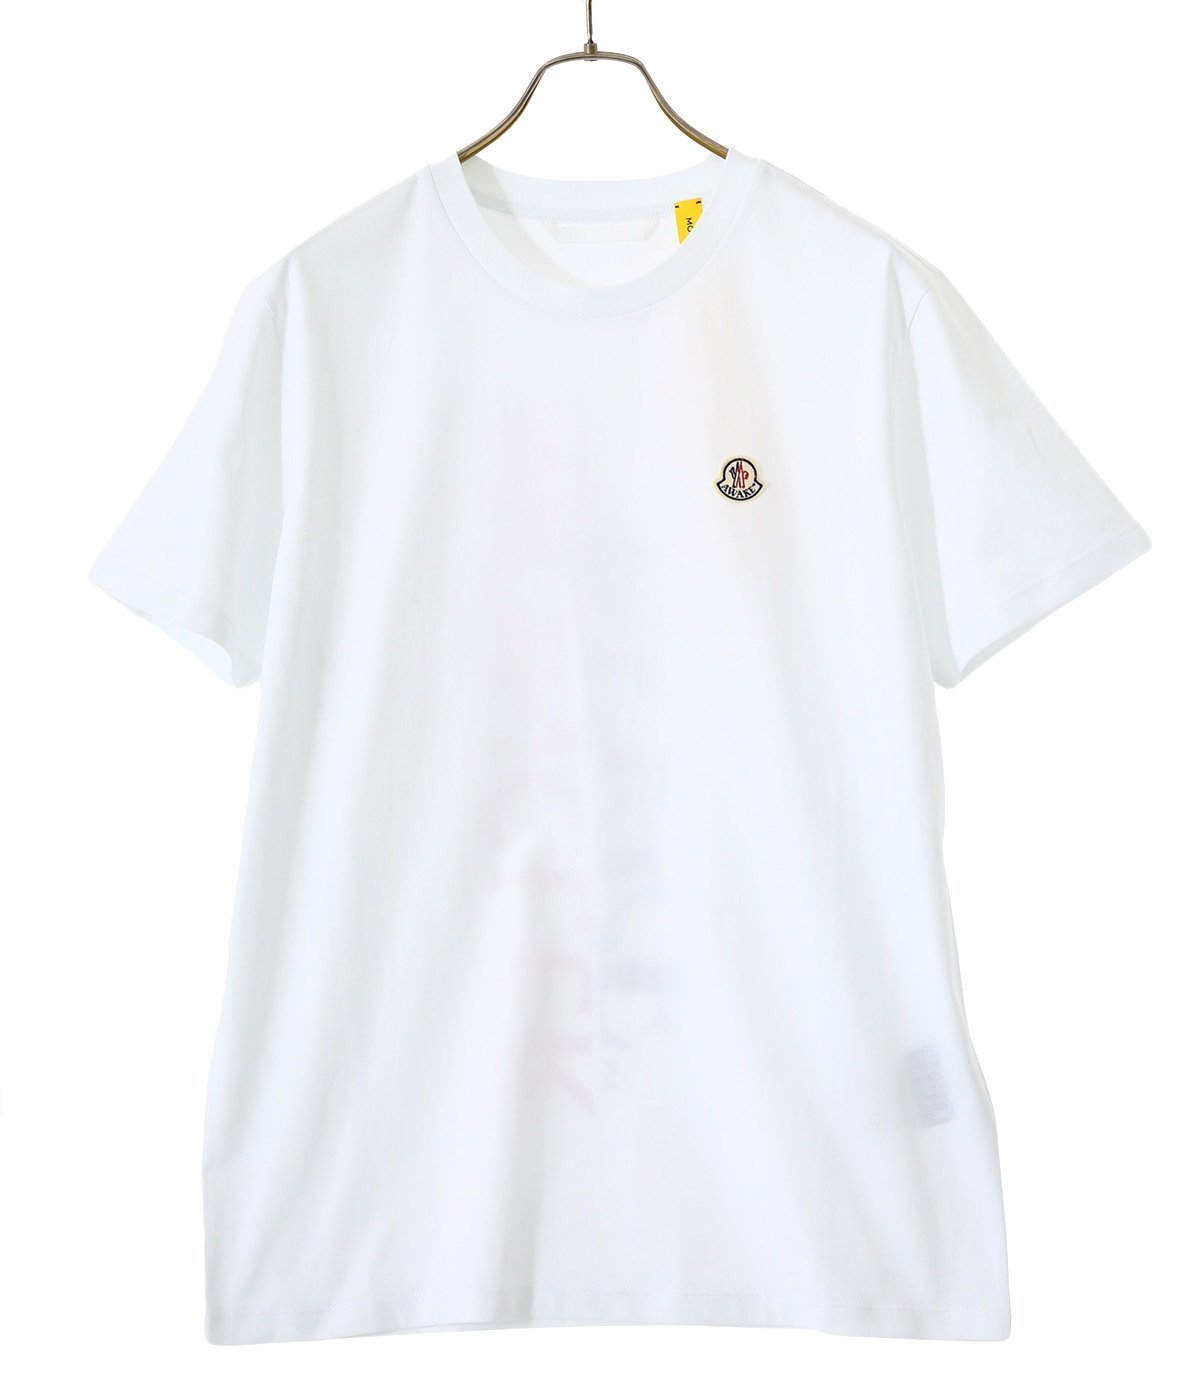 MONCLER(モンクレール) MAGLIA T-SHIRT / トップス カットソー半袖・T 